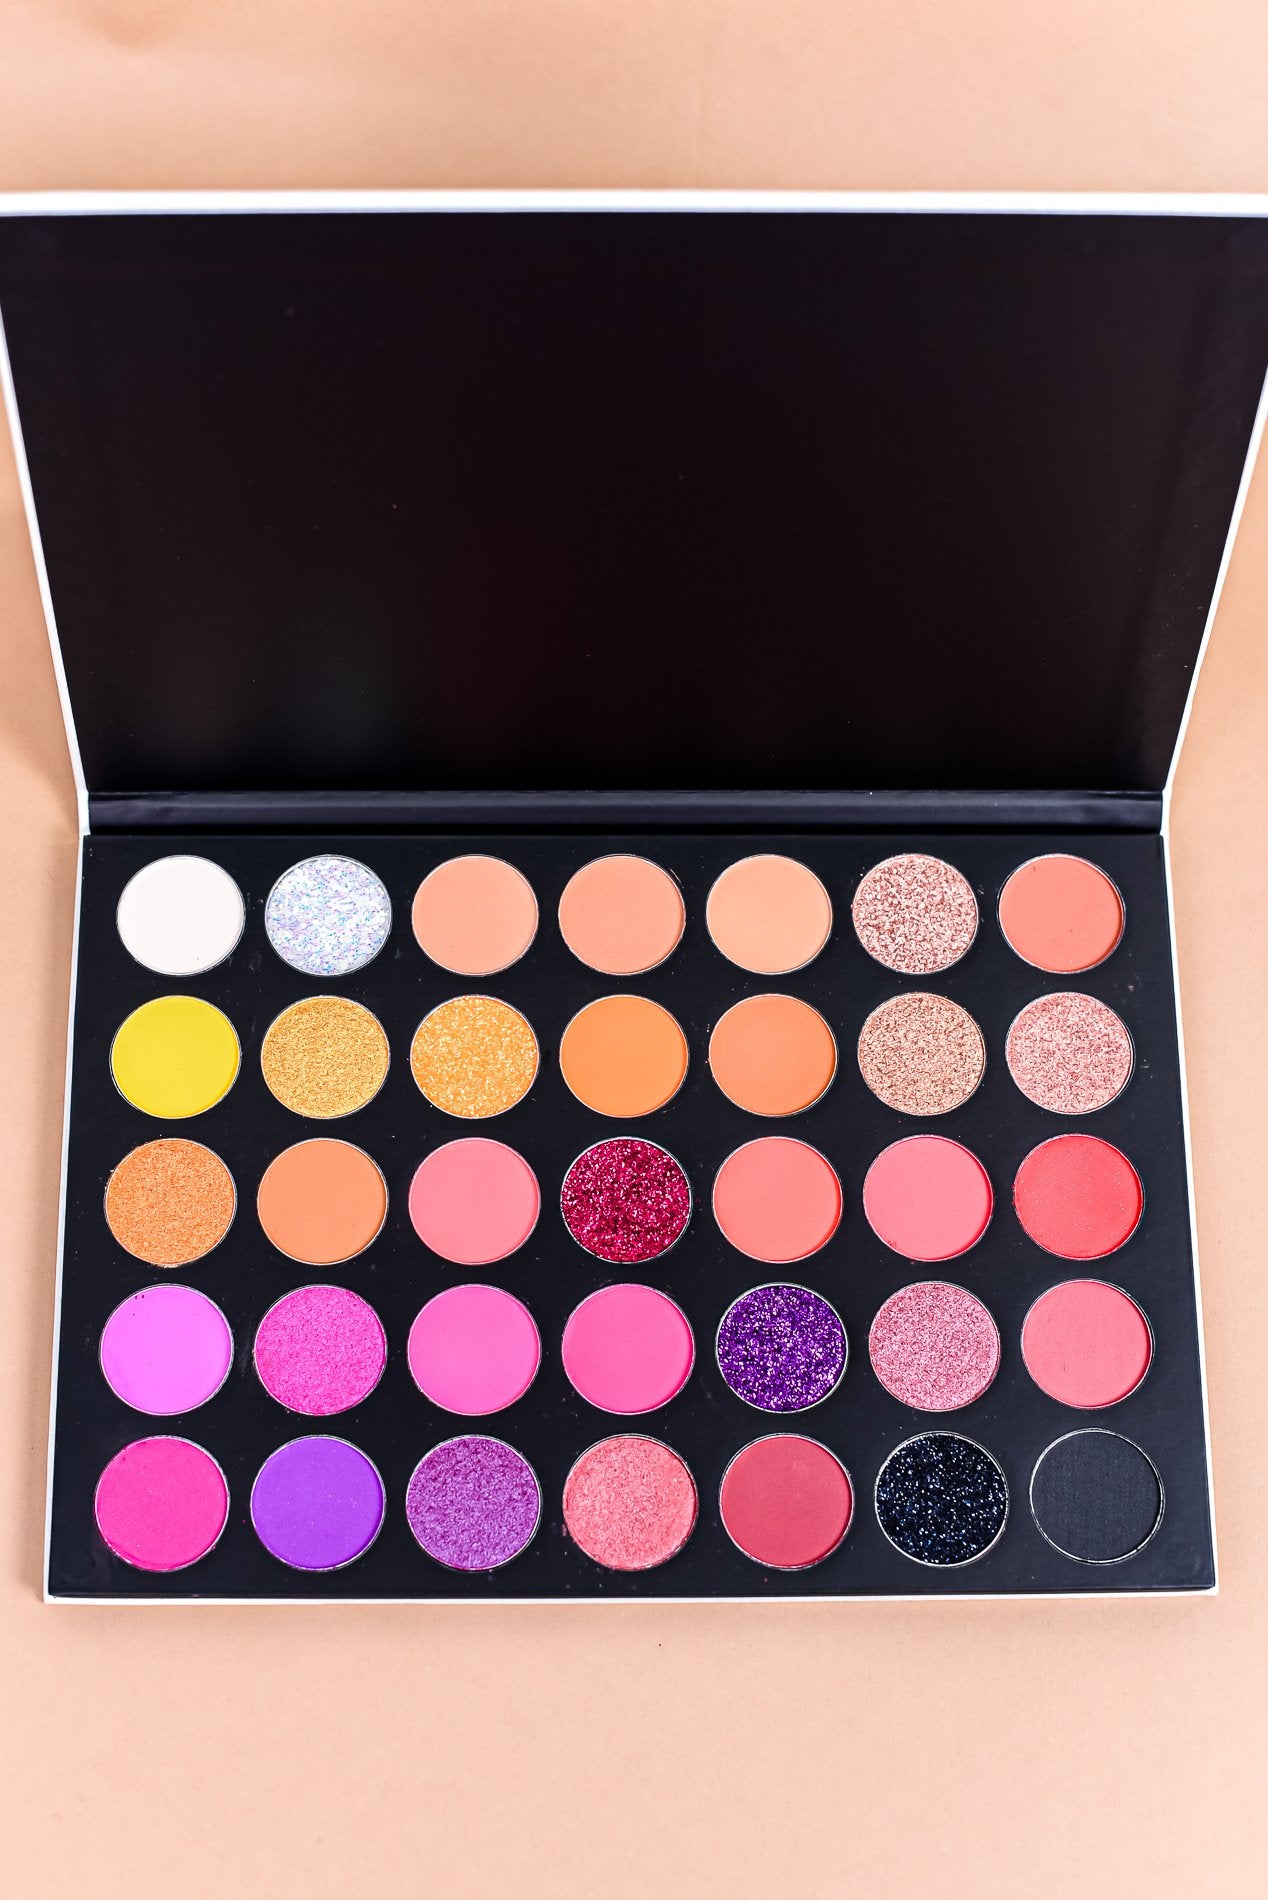 Color Me Pretty 35 Shade Eyeshadow Palette - LUX043